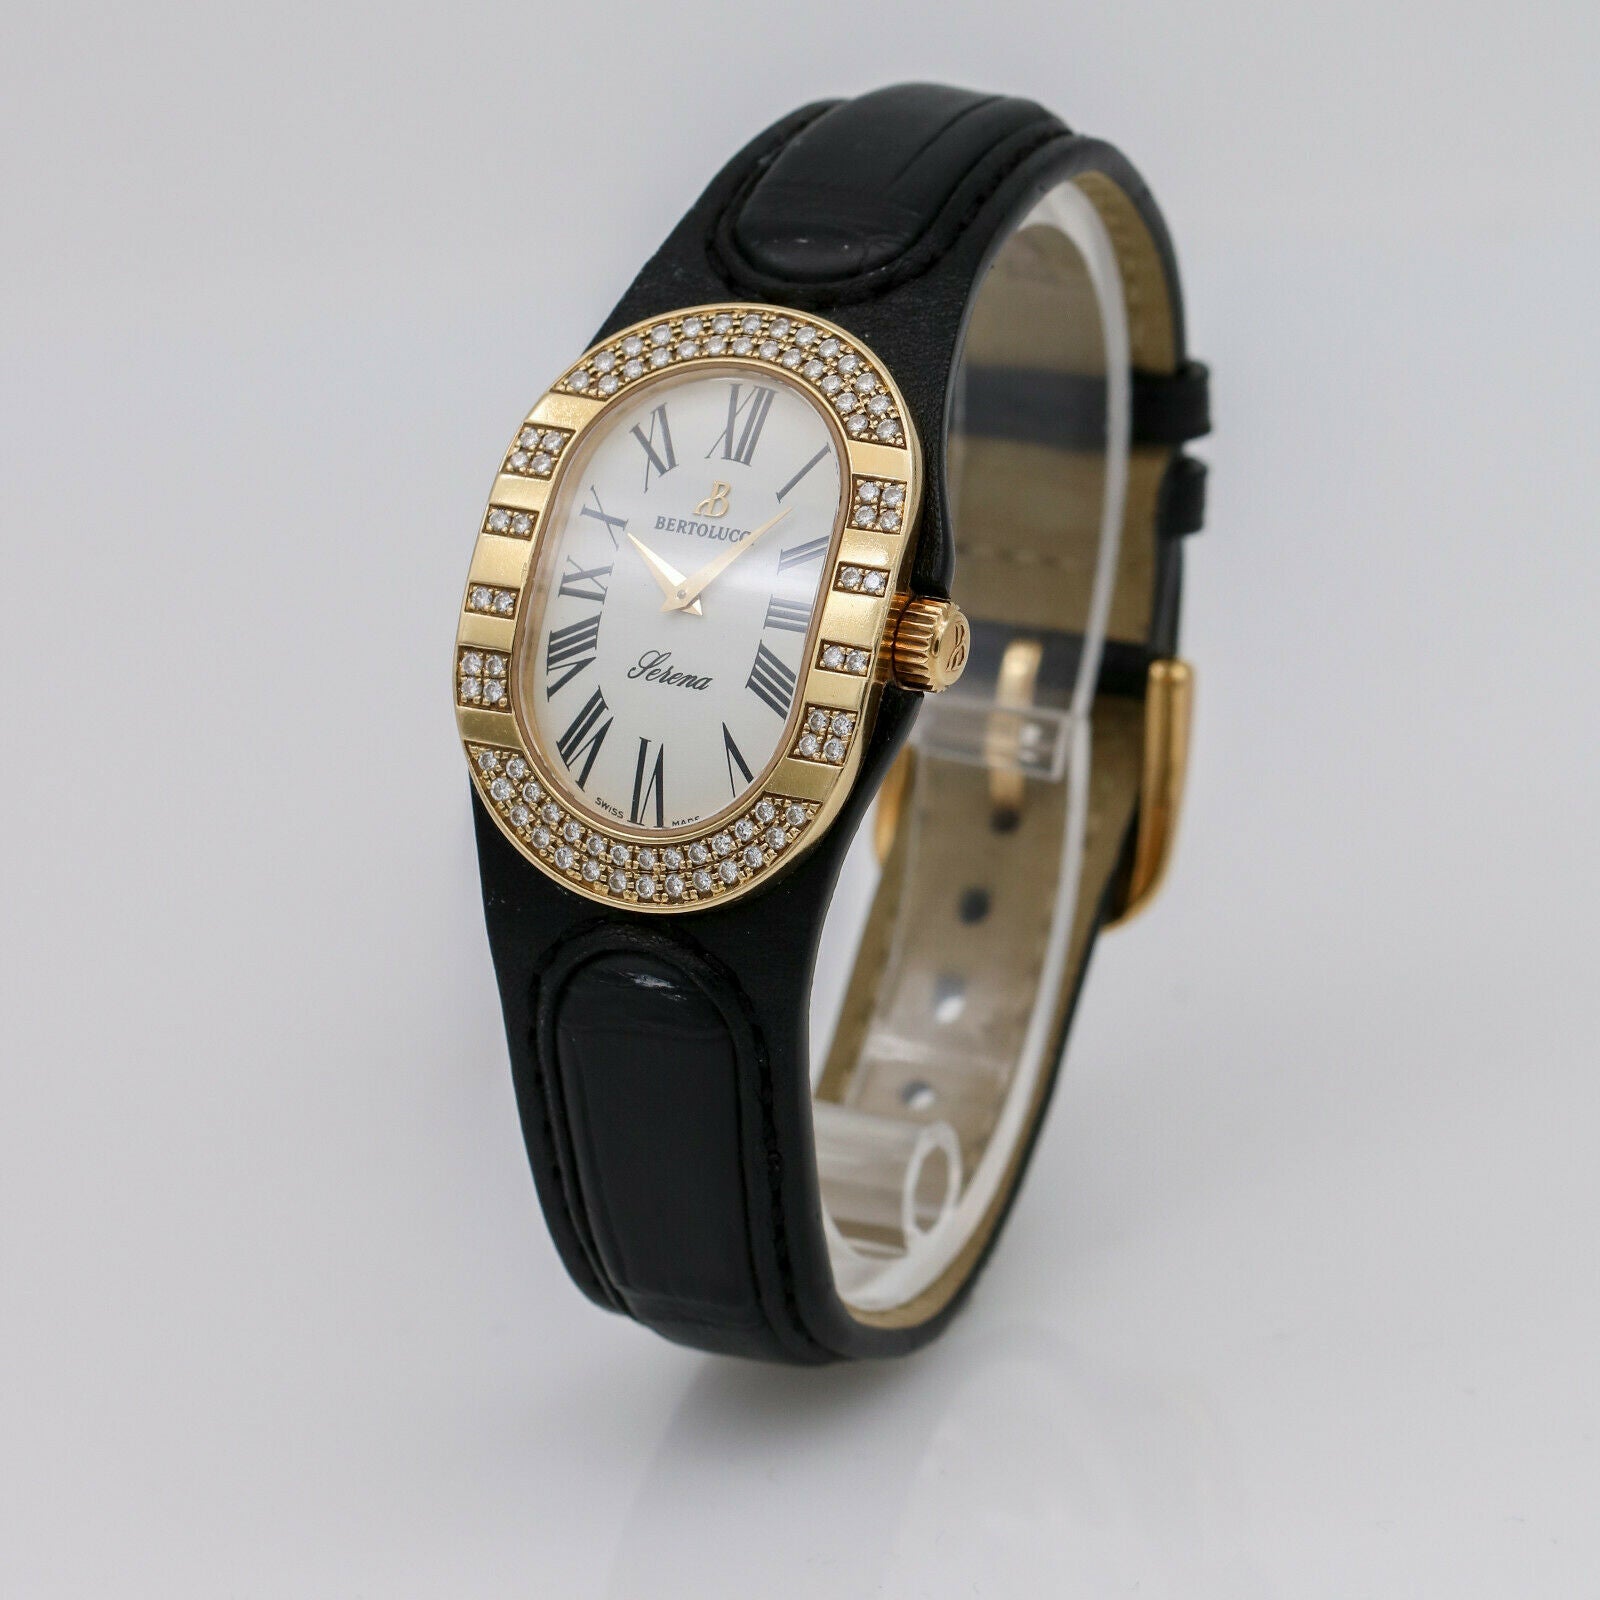 Bertolucci Serena 18k Yellow Gold Watch with Diamond Bezel With Box & Papers